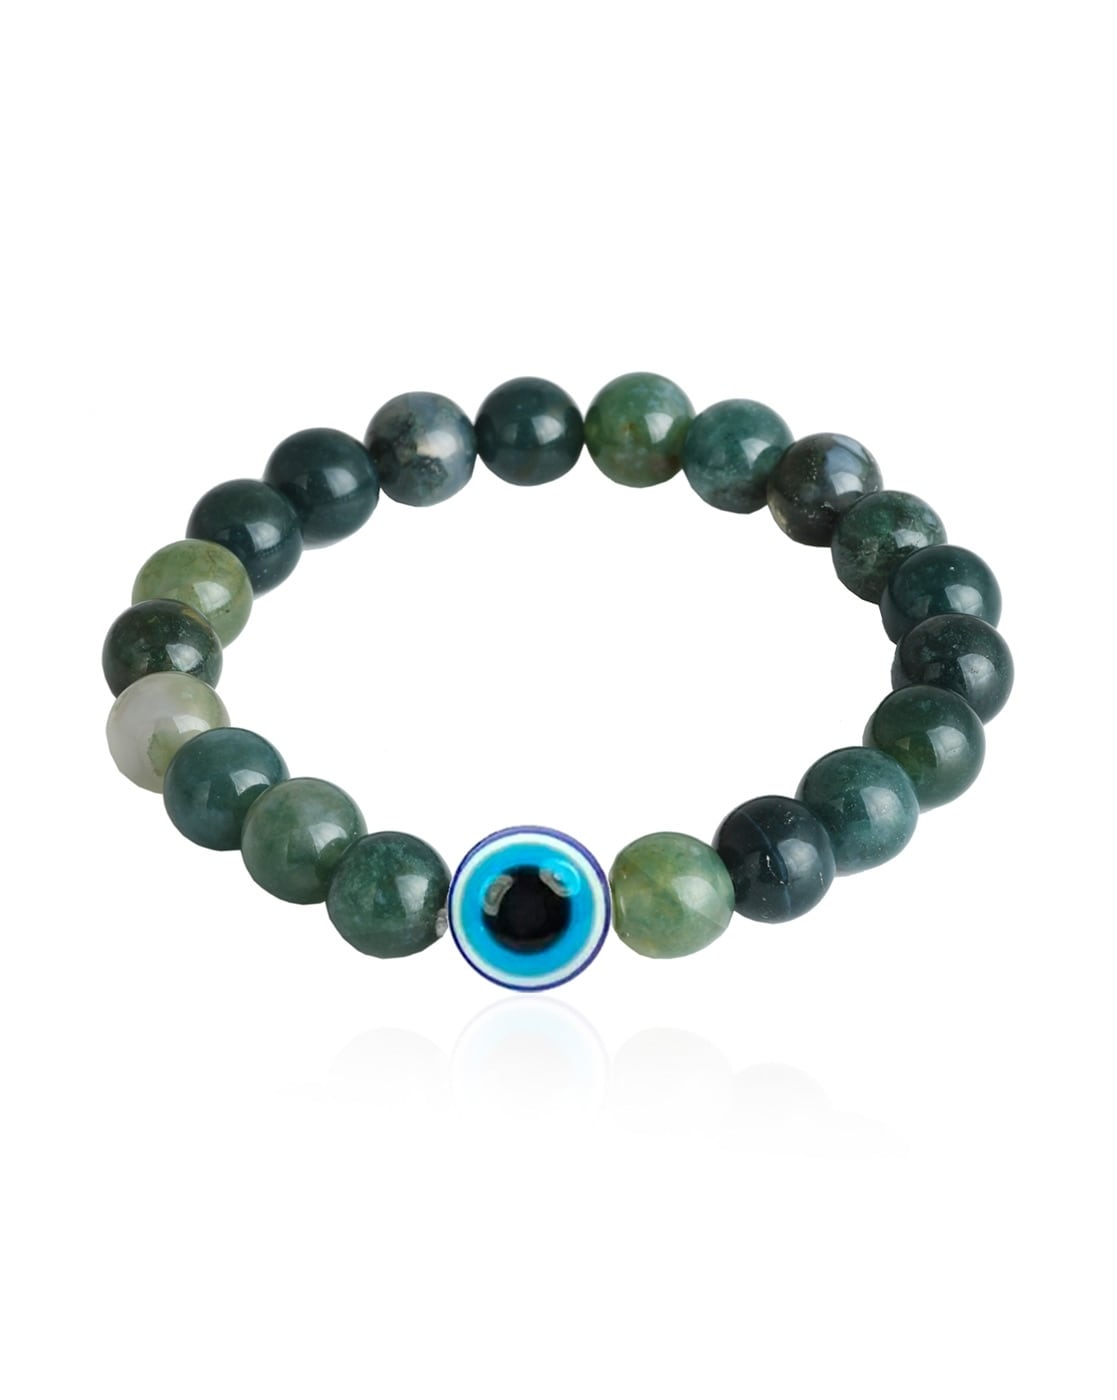 Buy Lime Green Evil Eye Bracelet, Jewelry, Gift, Unique Gifts, Best Friend  Gifts, Gift for Her, Friendship Bracelet Online in India - Etsy